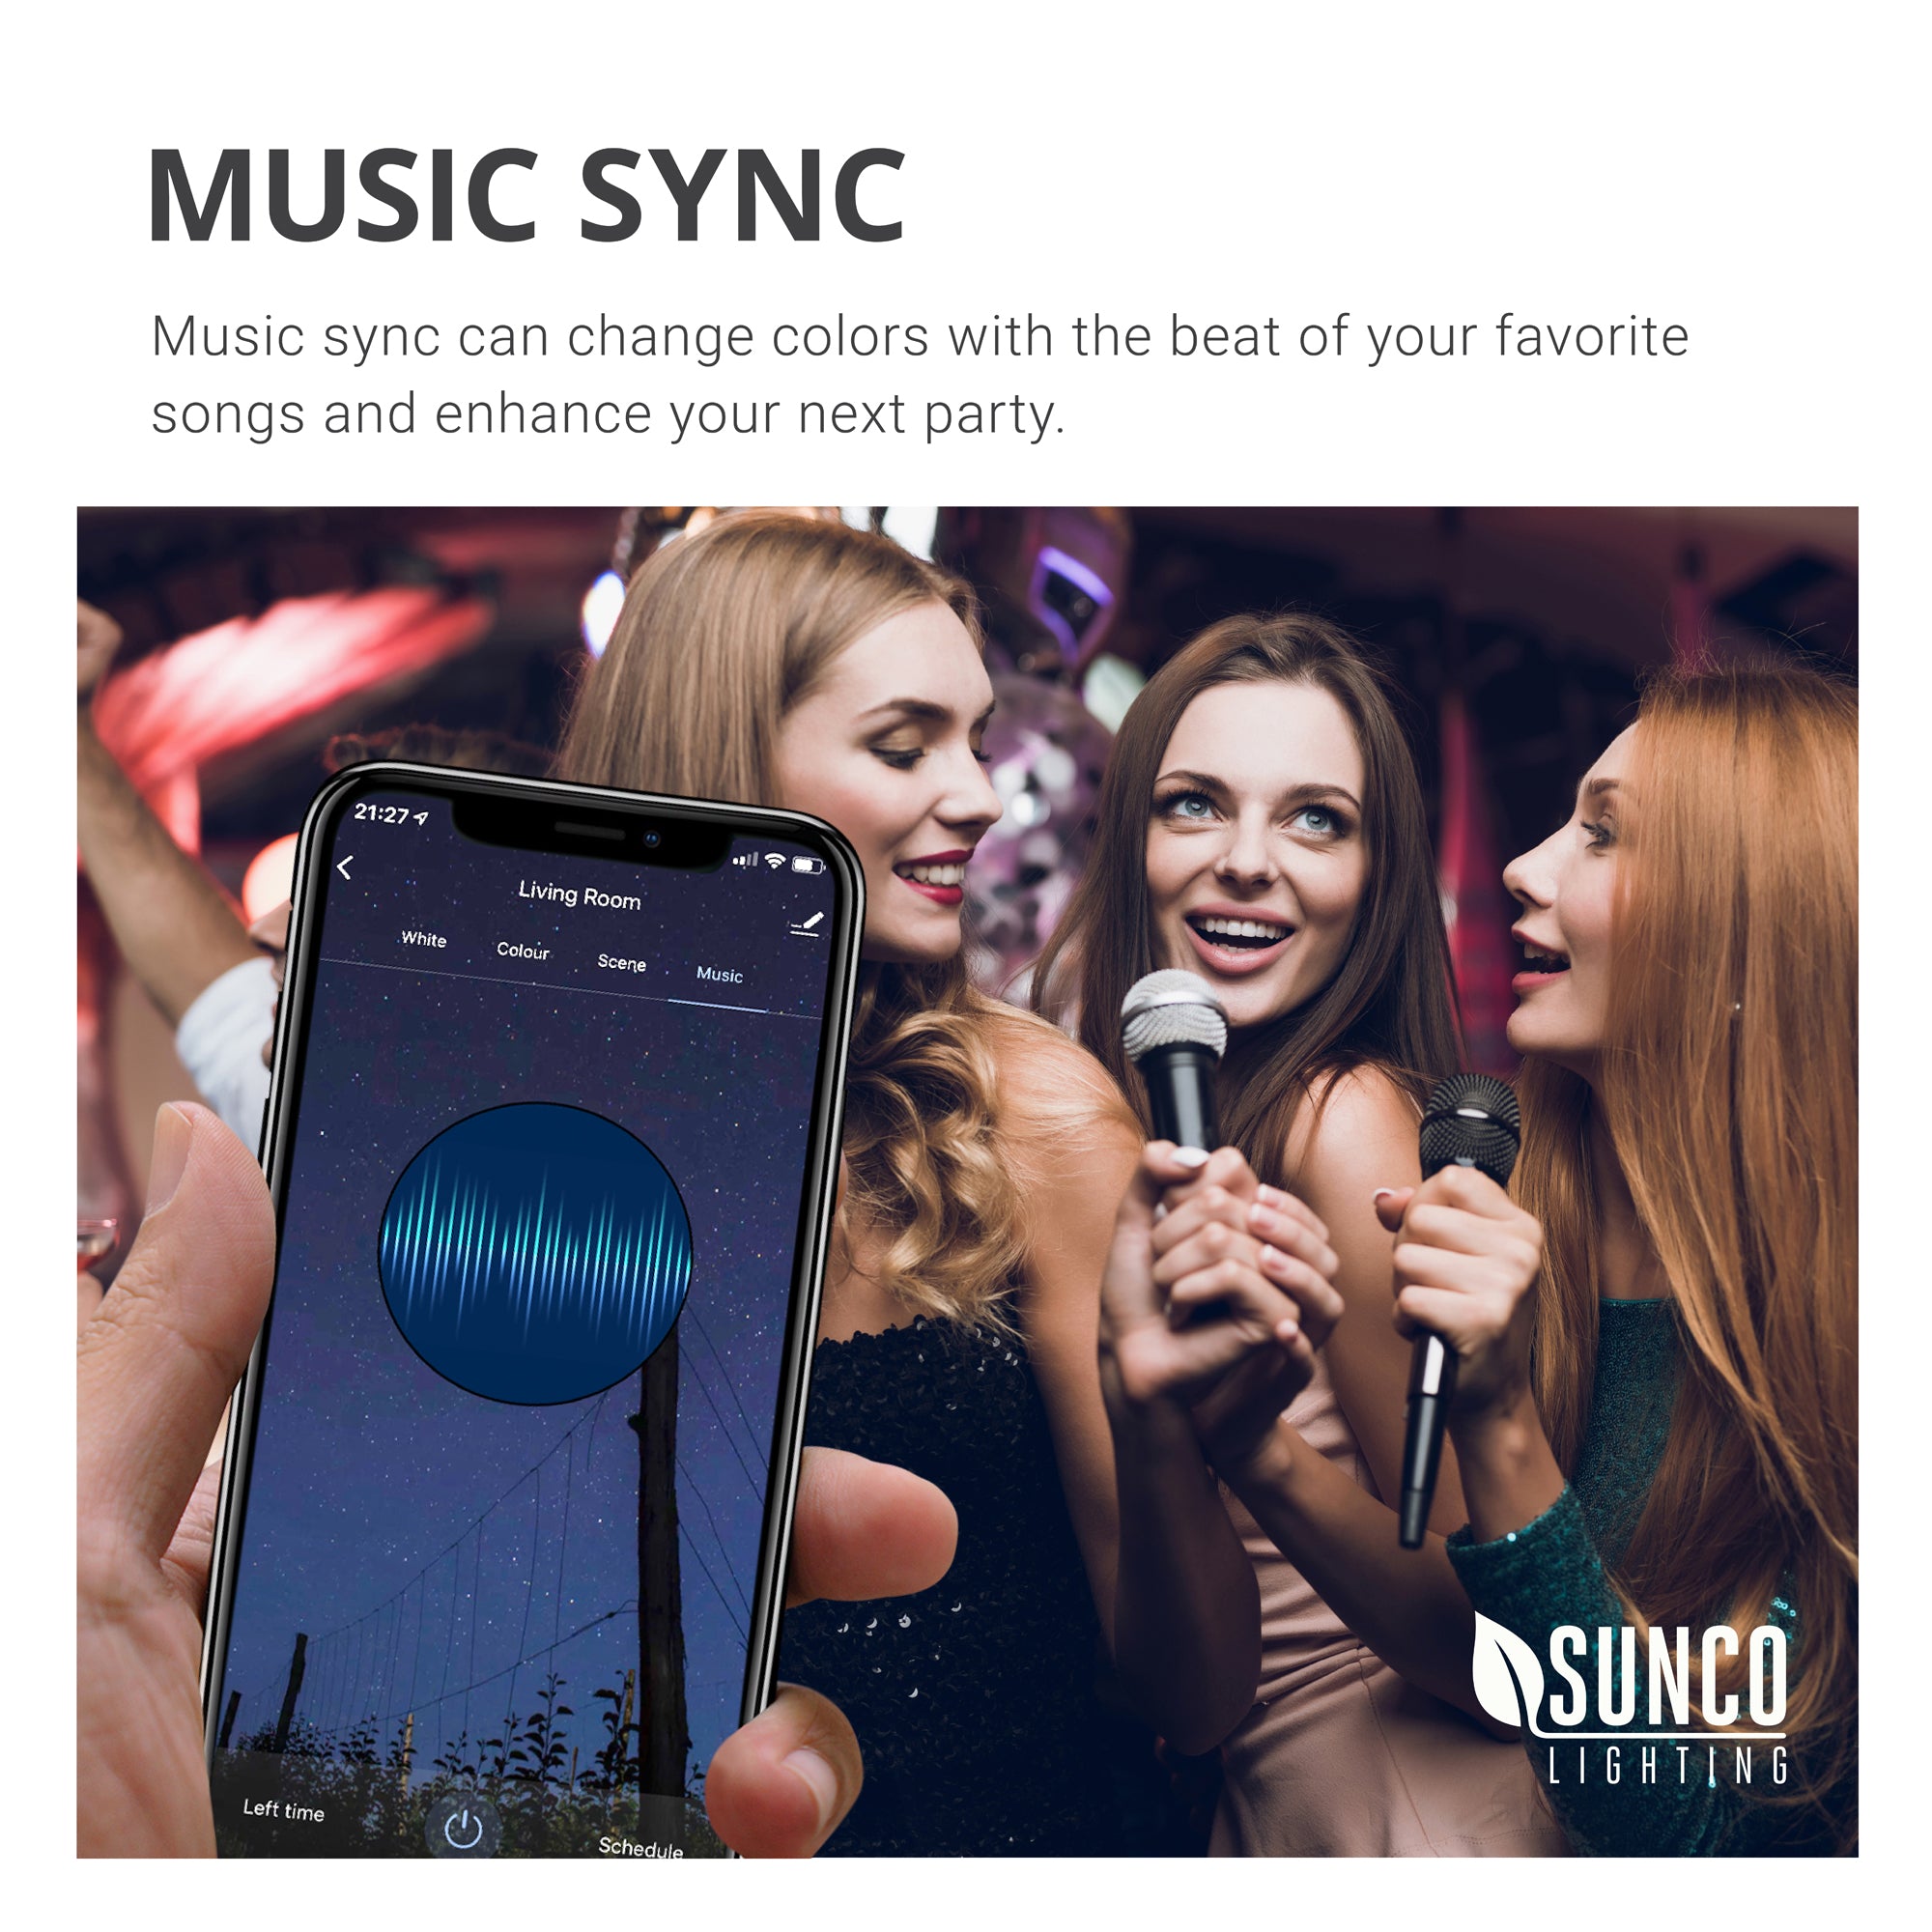 Music Sync. Change colors to the beat of your favorite songs and enhance your next party with the music sync settings in our app. This G25 LED Smart Bulb can be controlled on its own or in a group. Learn more about all the setting options in our install manual. Images shows 3 people dancing and singing into microphones at a house party with a closeup of the app on a compatible smart phone.